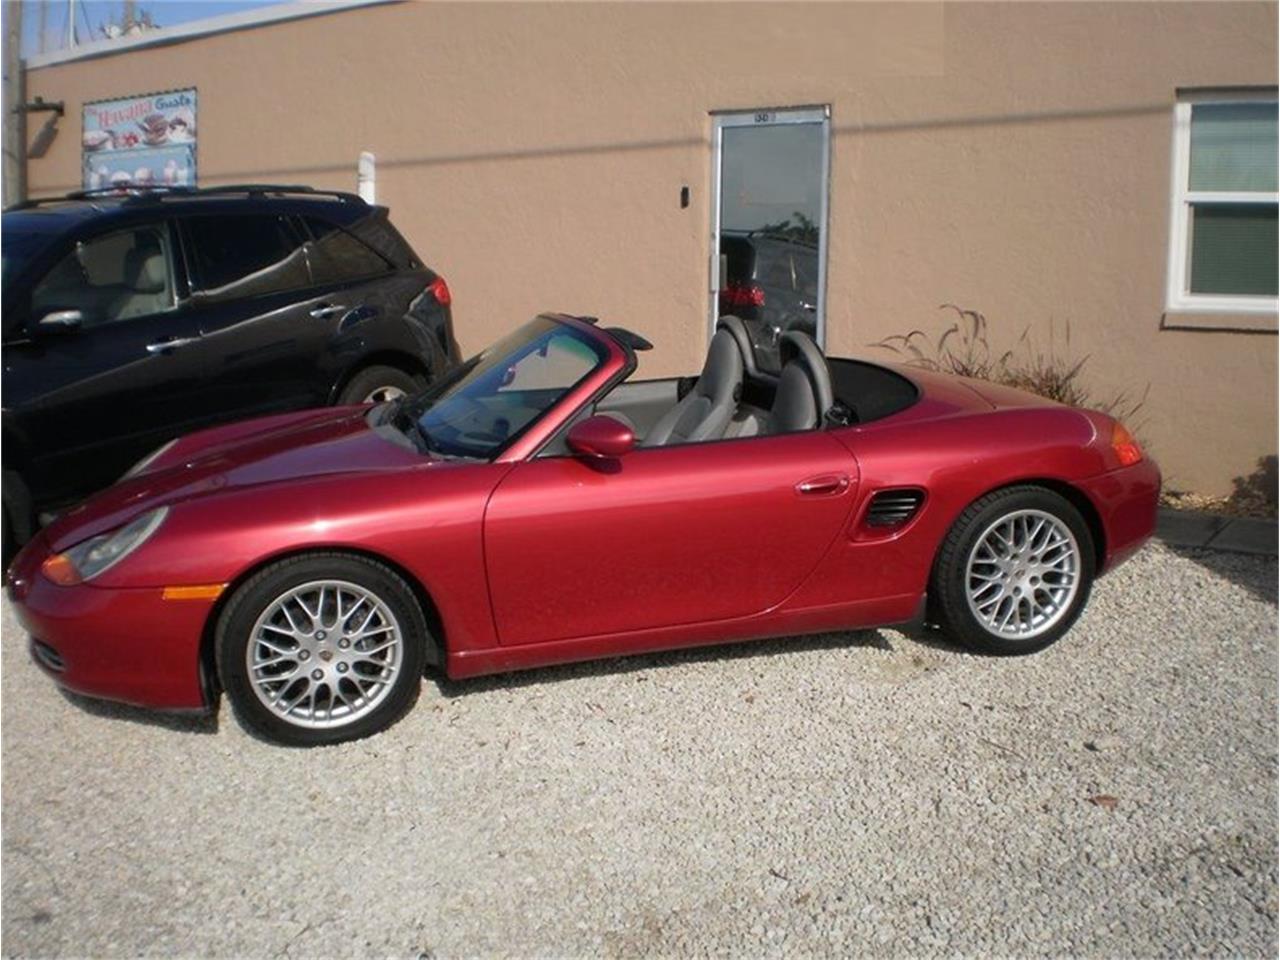 For Sale at Auction: 2001 Porsche Boxster in Punta Gorda, Florida for sale in Punta Gorda, FL